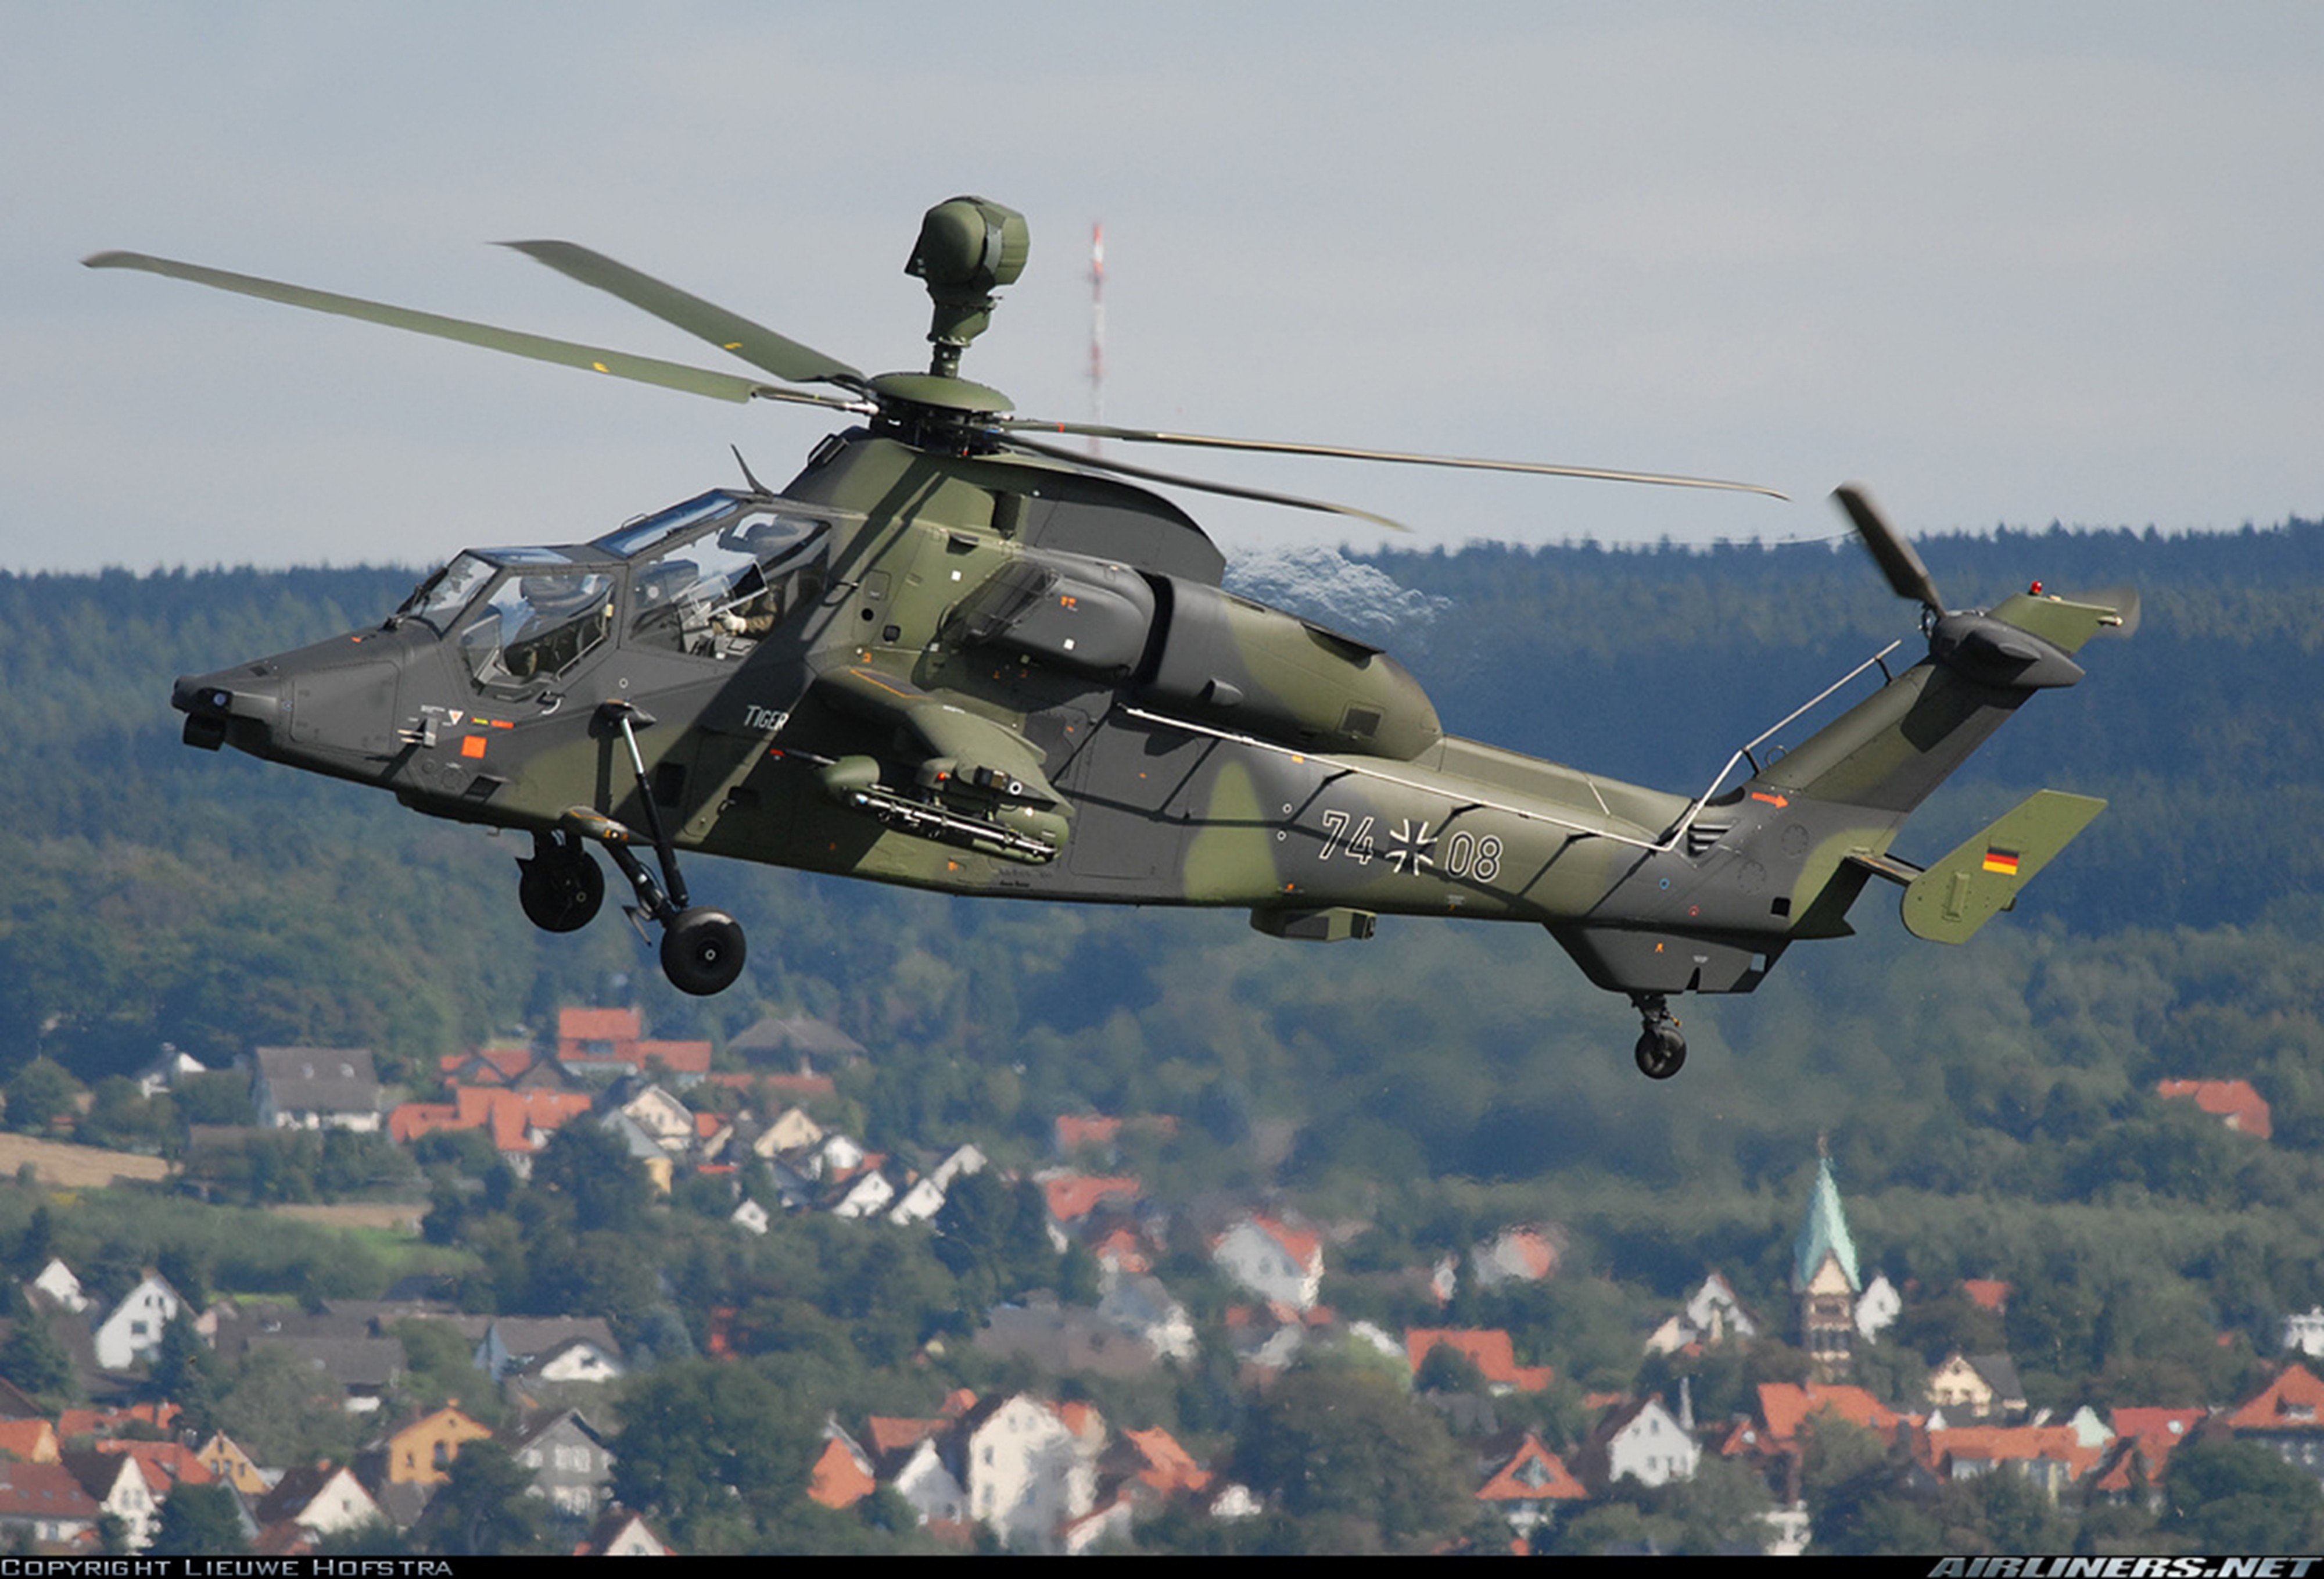 helicopter, Aircraft, Vehicle, Military, Army, Attack, Eurocopter, Tiger, Germany Wallpaper